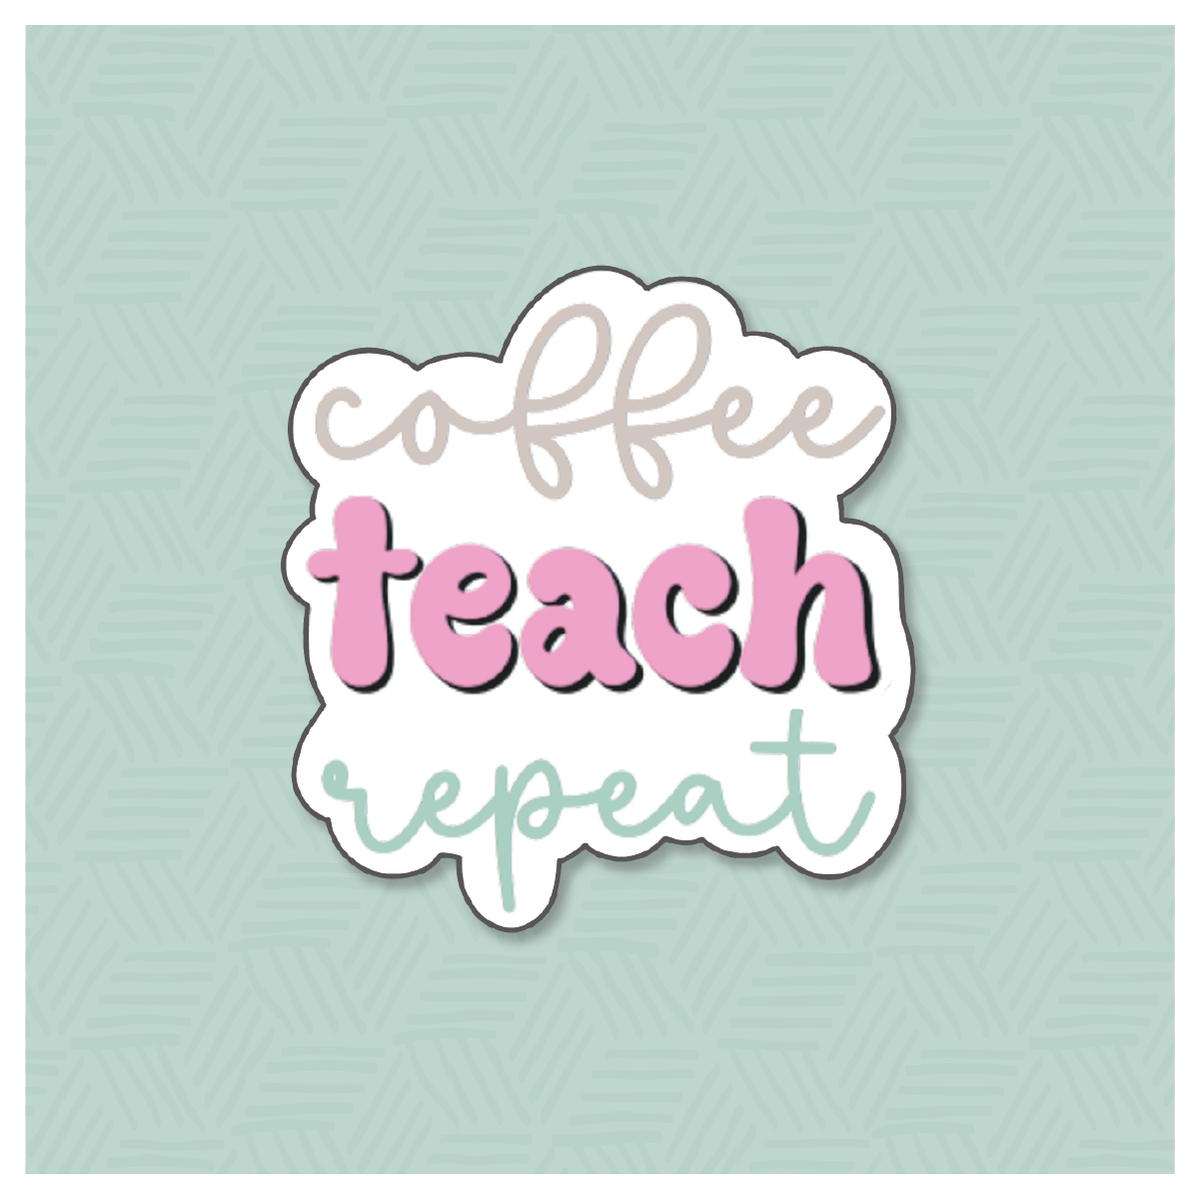 Coffee Teach Repeat 1 Hand Lettered Cookie Cutter